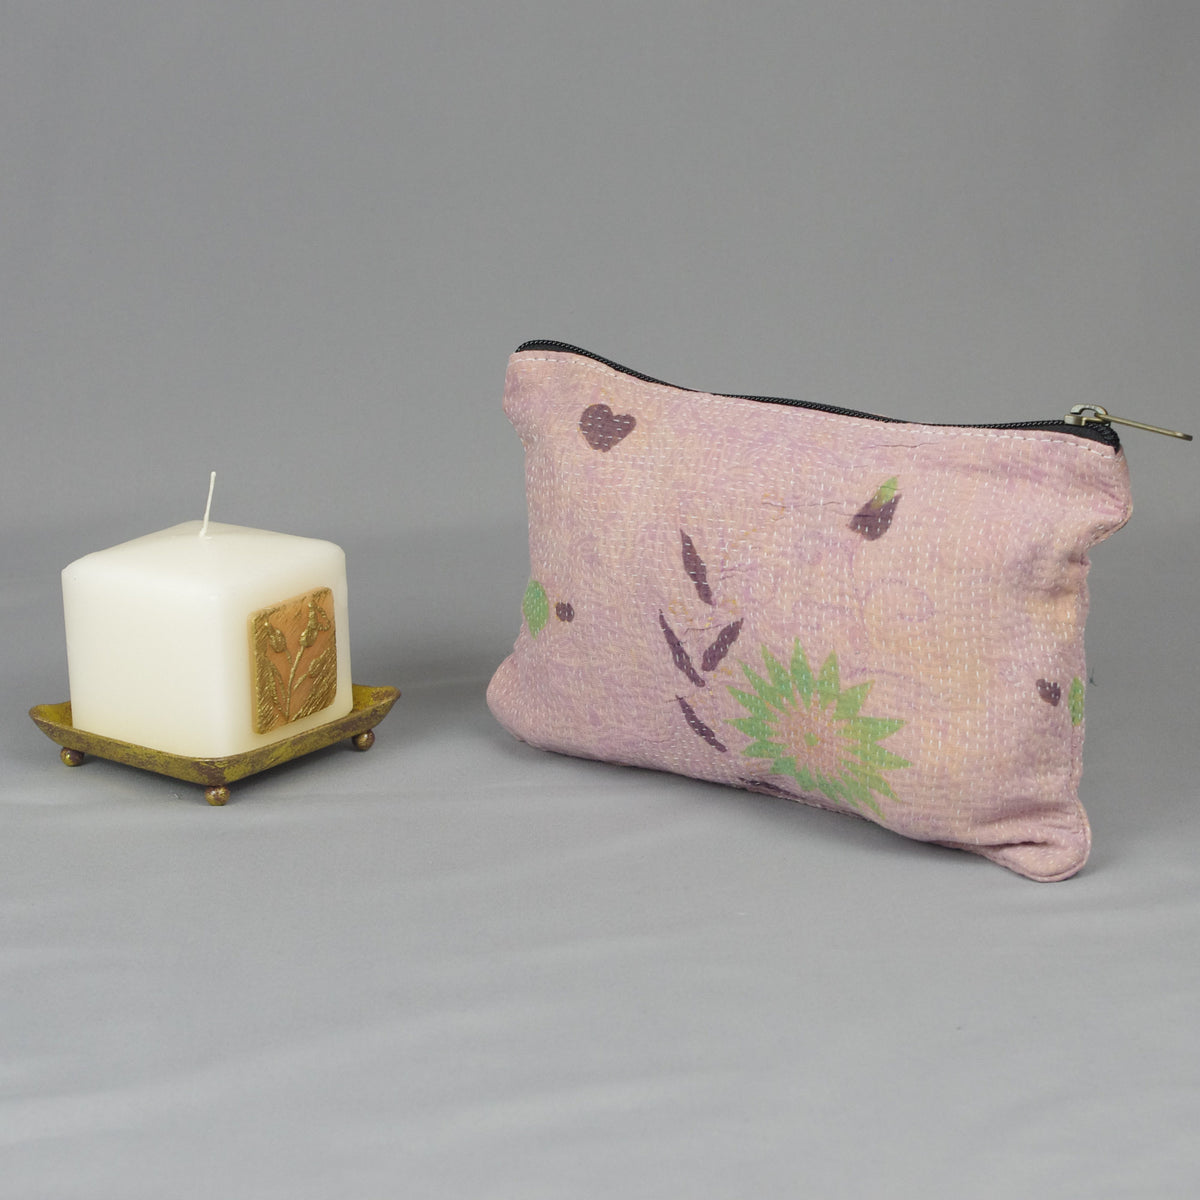 Vintage Kantha Pouch, Cosmetic Bag - Light Pink